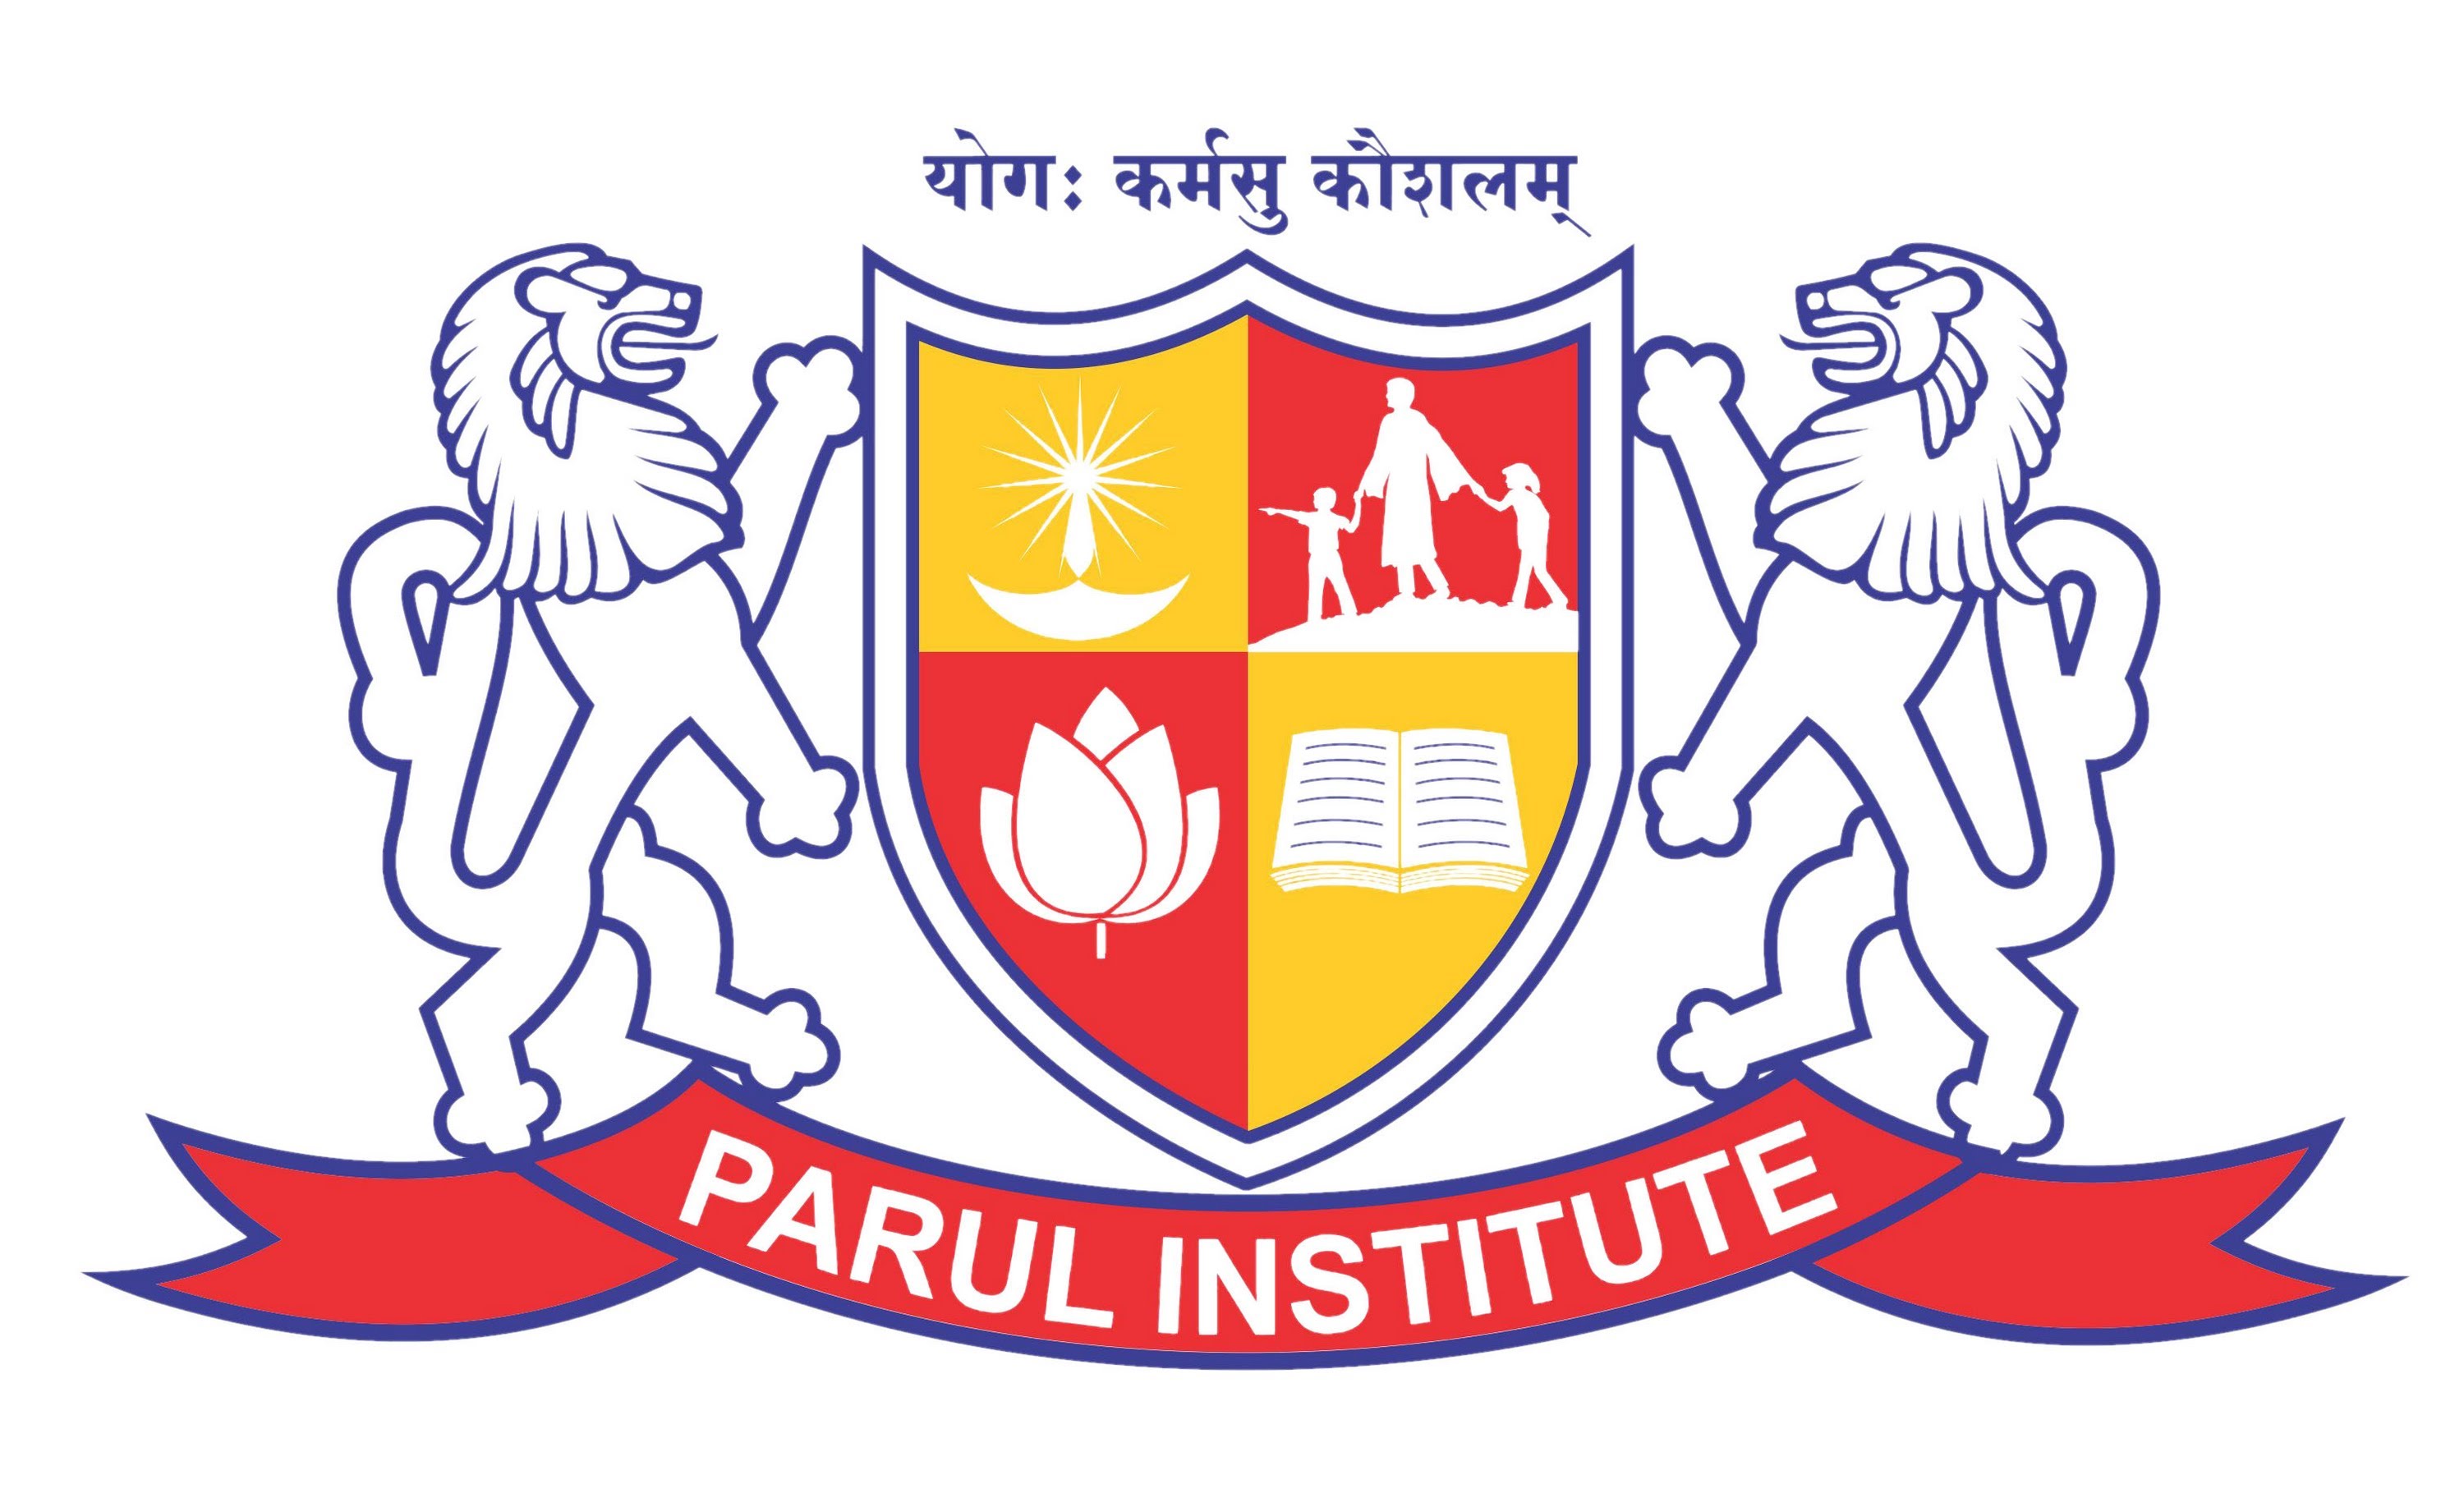 PARUL INSTITUTE OF ENGINEERING & TECHNOLOGY